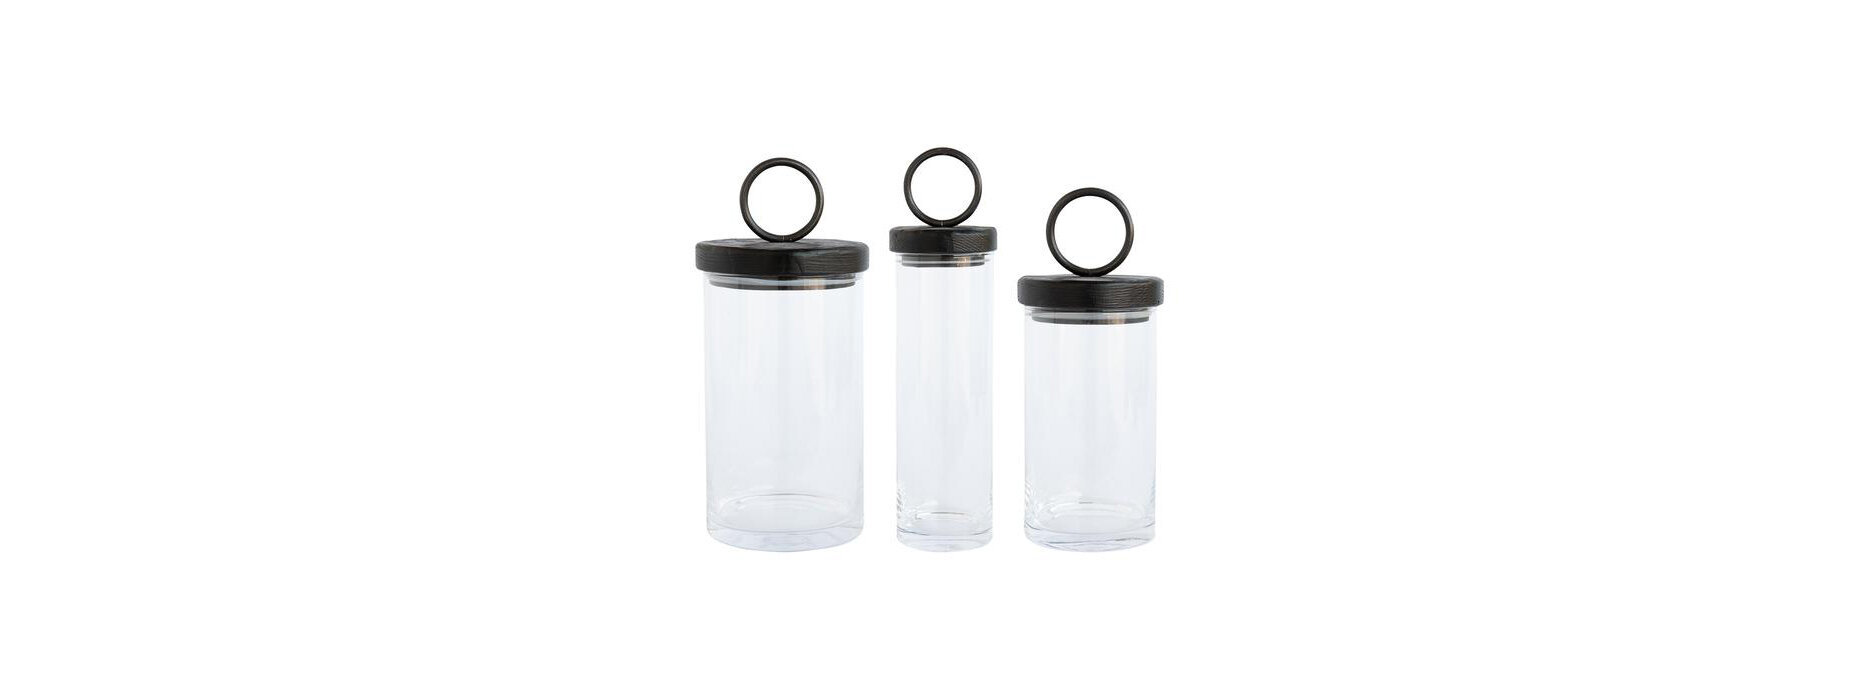 Kitchen Ring Top Containers.jpg